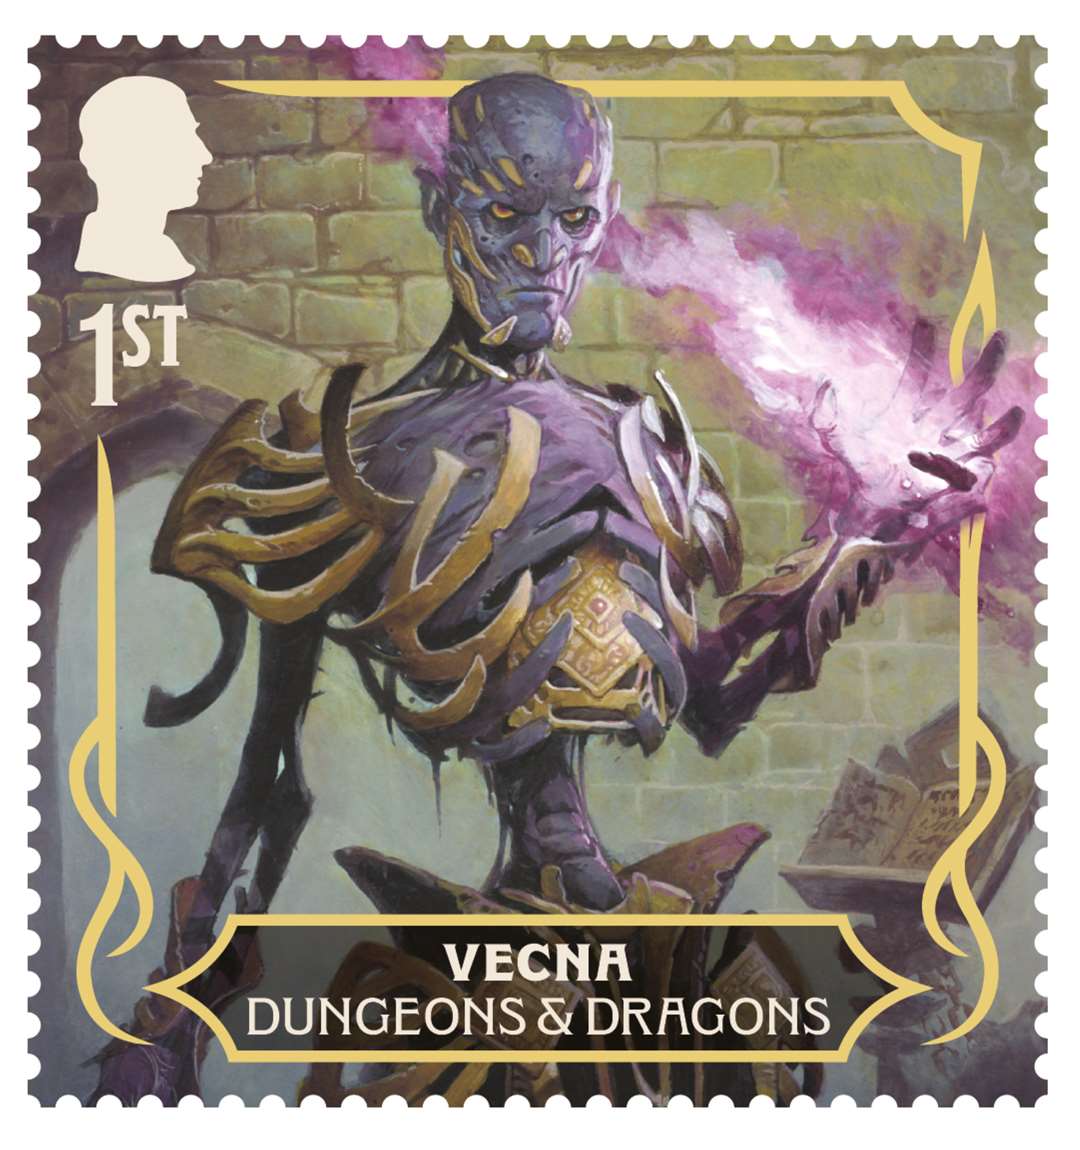 Four of the monster stamps, Vecna, Red Dragon, Mimic and Beholder, reveal a special graphic under ultraviolet light (Royal Mail/PA)